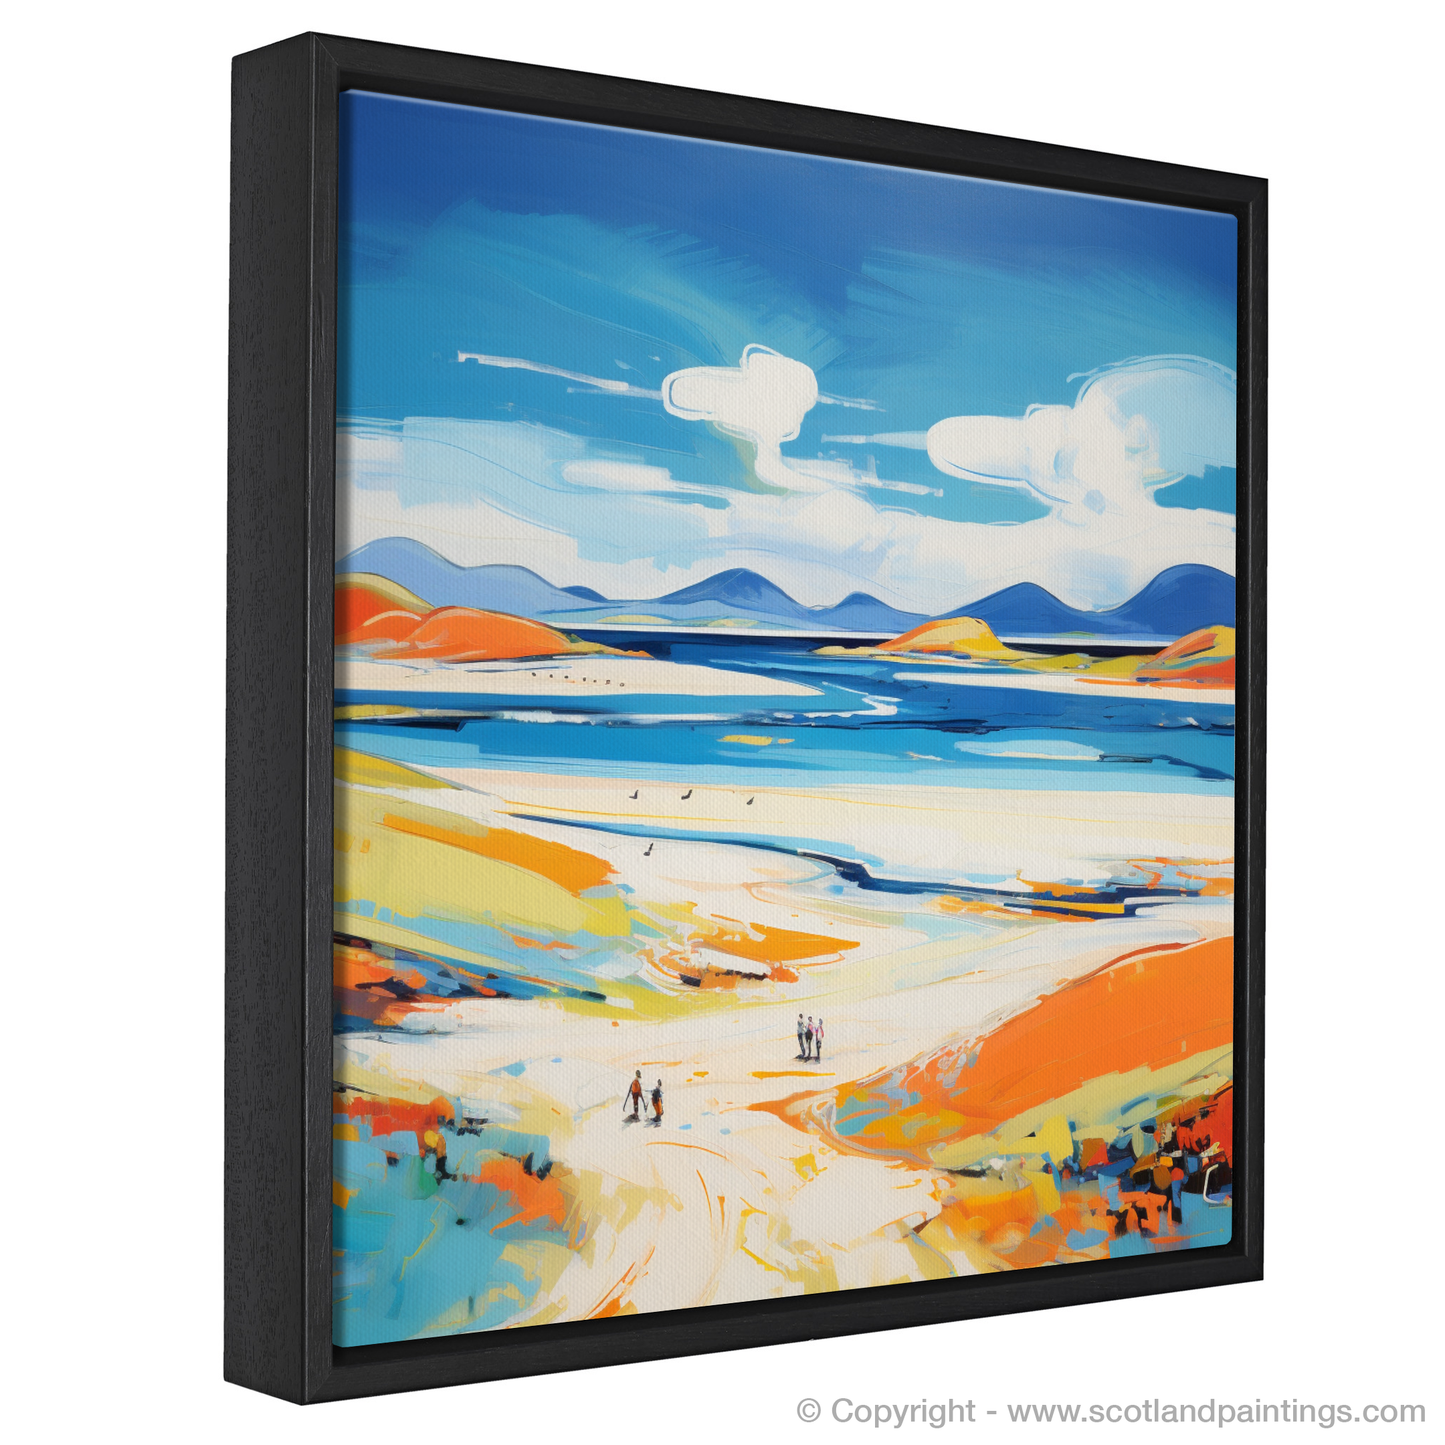 Painting and Art Print of Luskentyre Beach, Isle of Harris entitled "Luskentyre Beach: A Fauvist Ode to Scottish Shores".